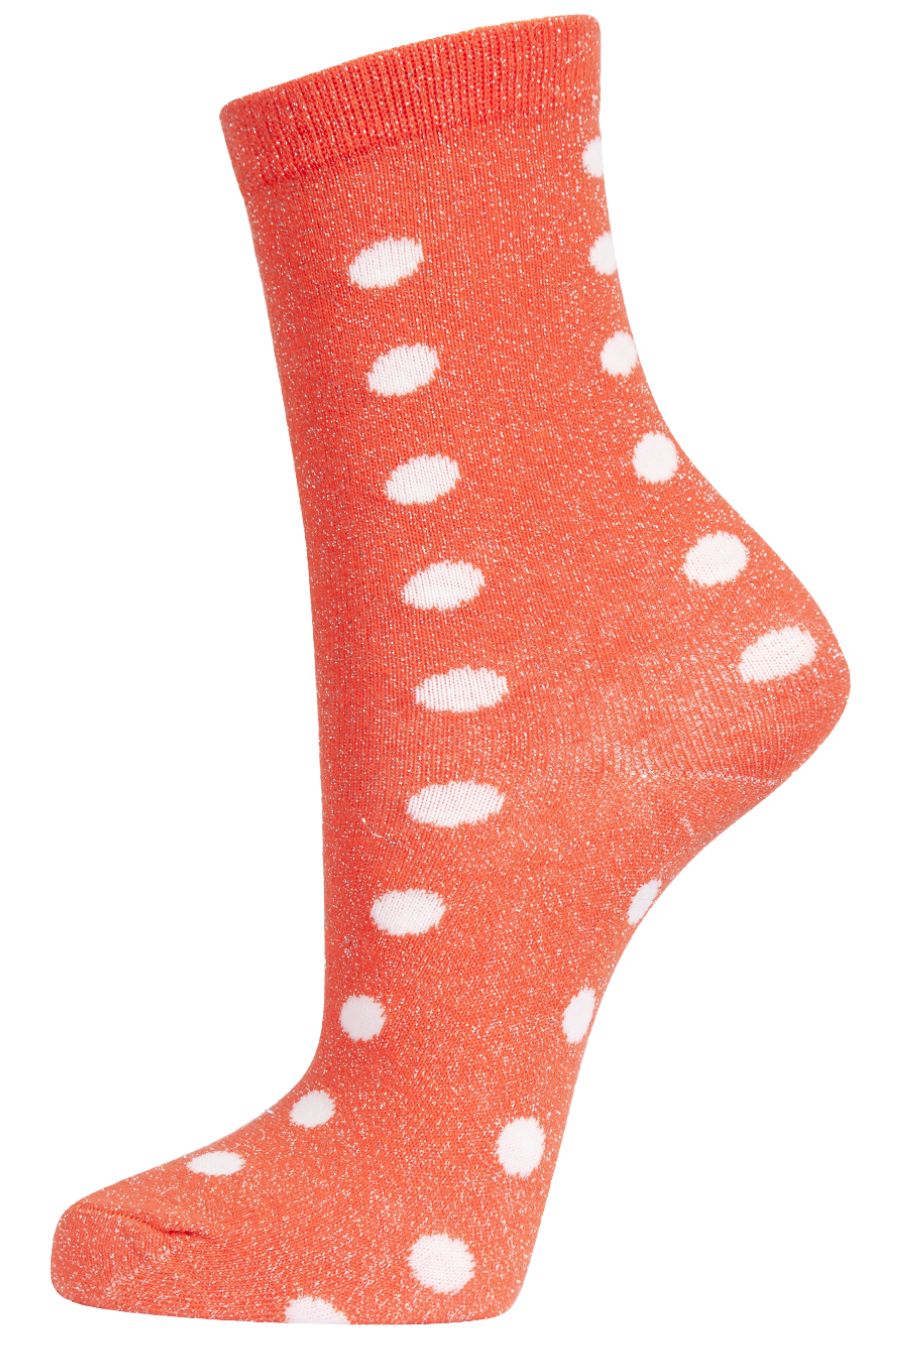 orange and white polka dot ankle socks with an all over silver glitter shimmer